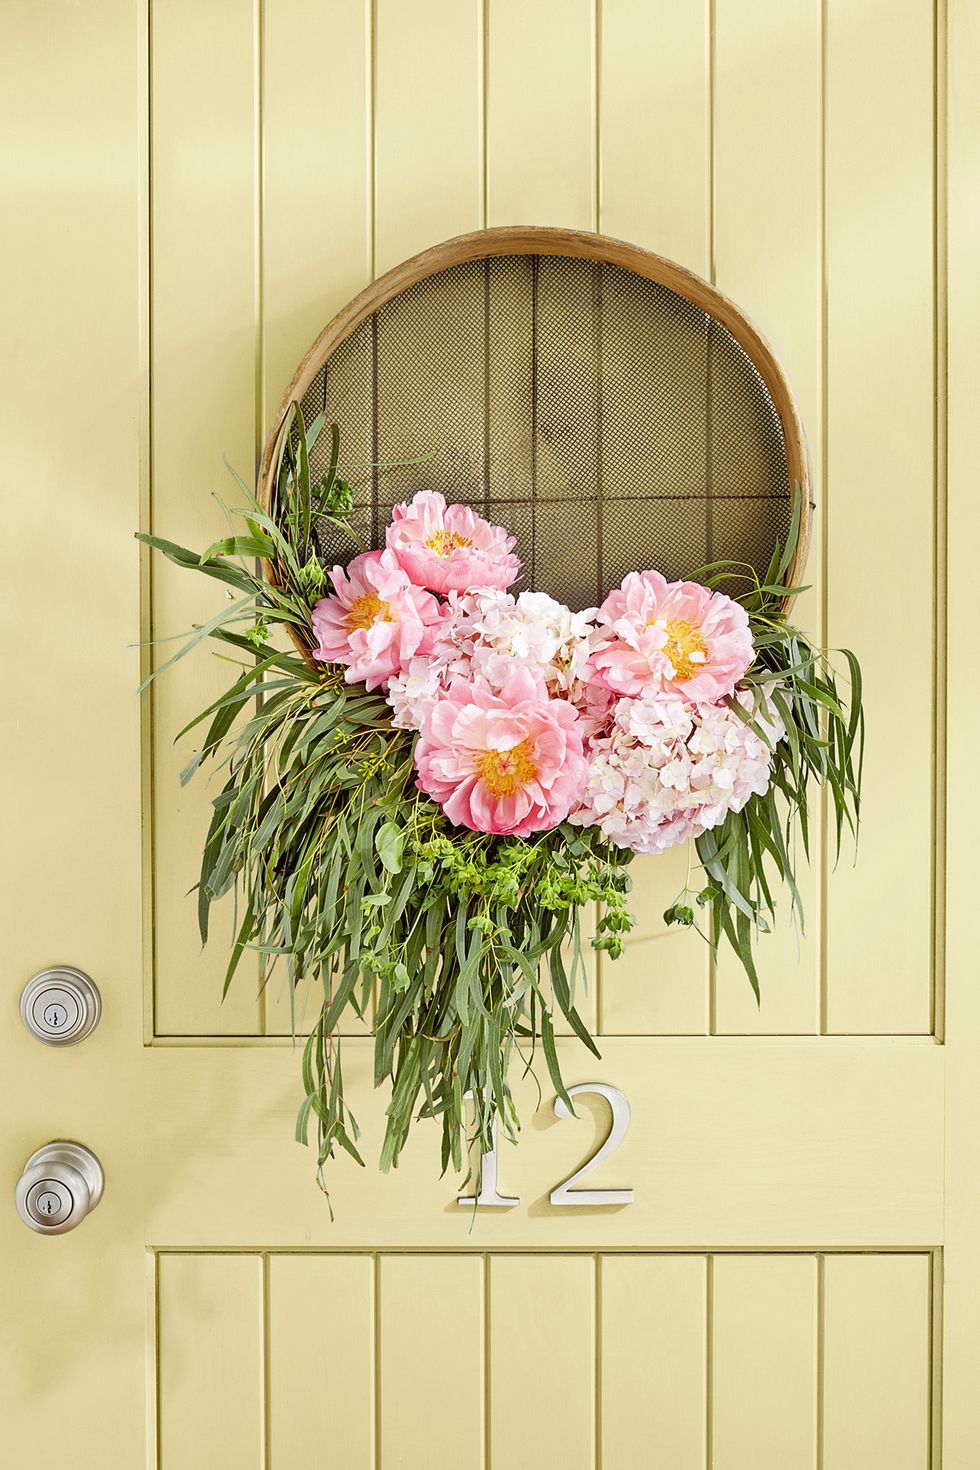 vintage grain sifter turned into a summer door wreath with pink flowers and greenery filling the lower curve